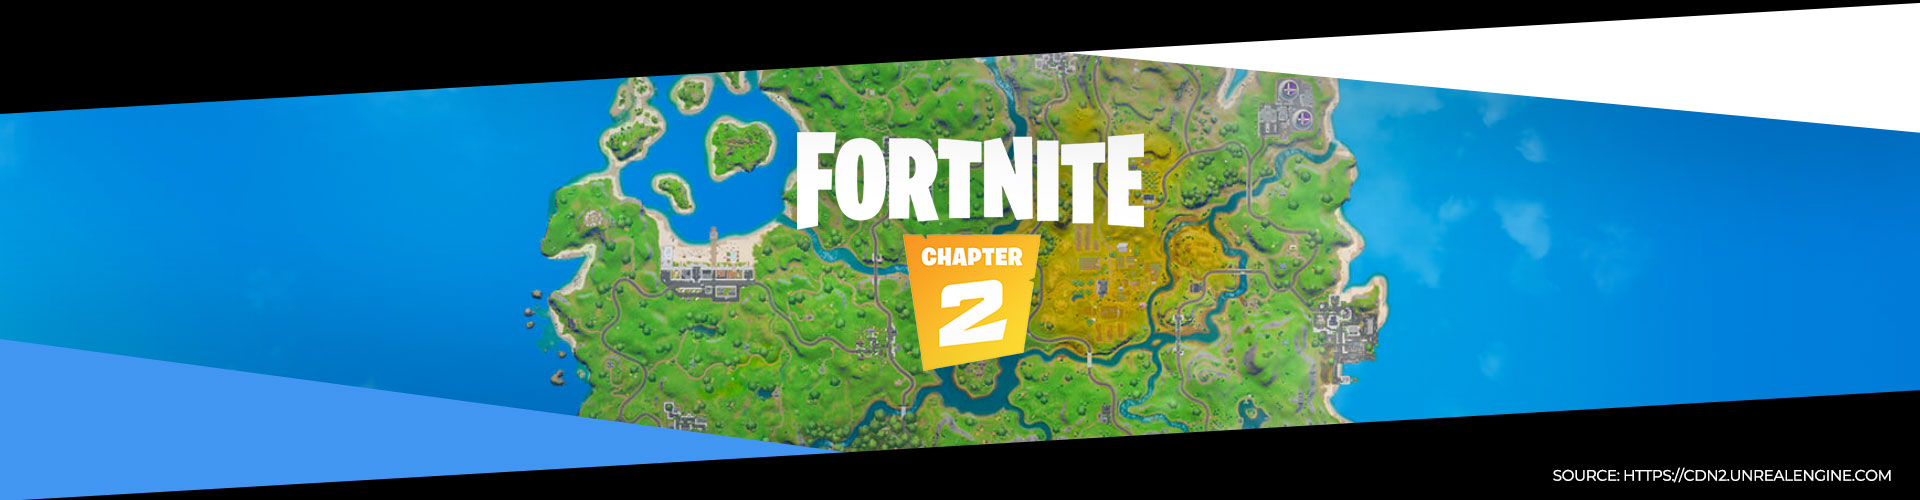 Fortnite Chapter 2 Changes